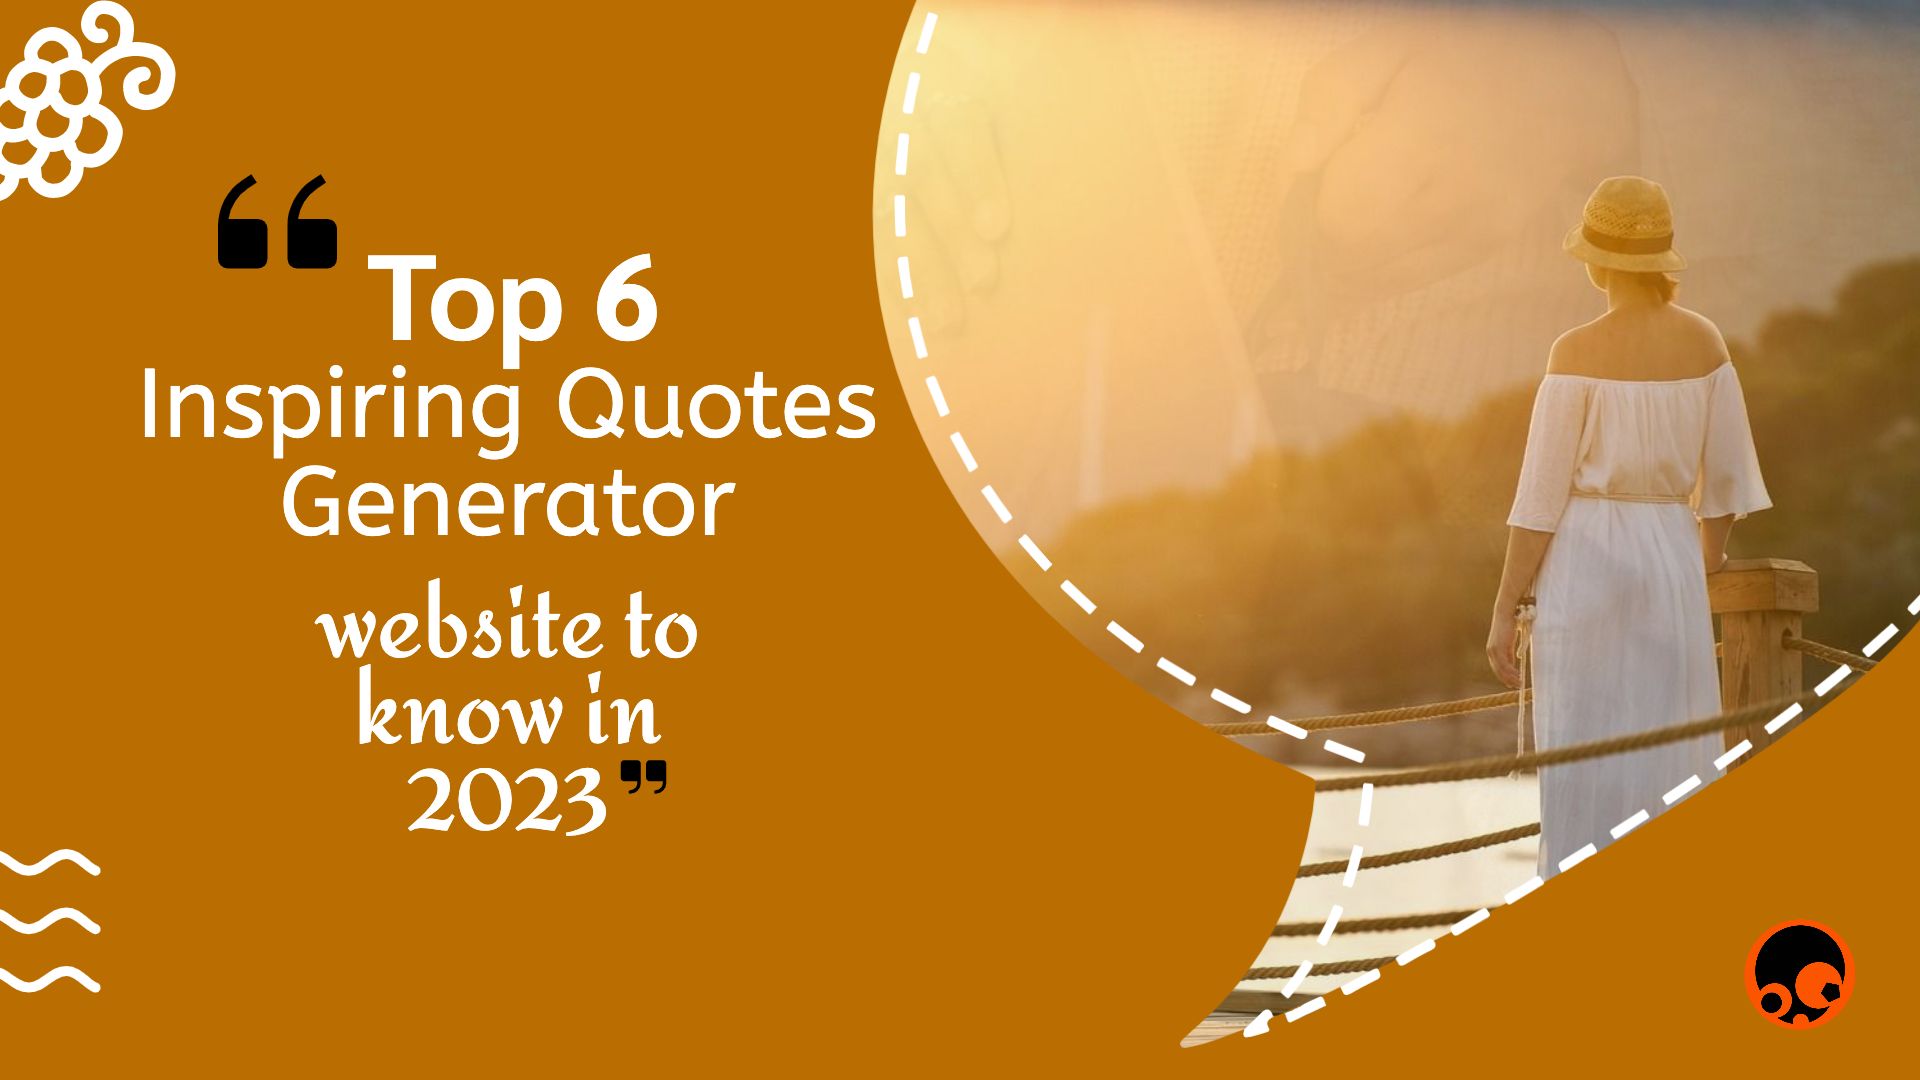 Top 6 Inspiring Quotes Generator website to know in 2023